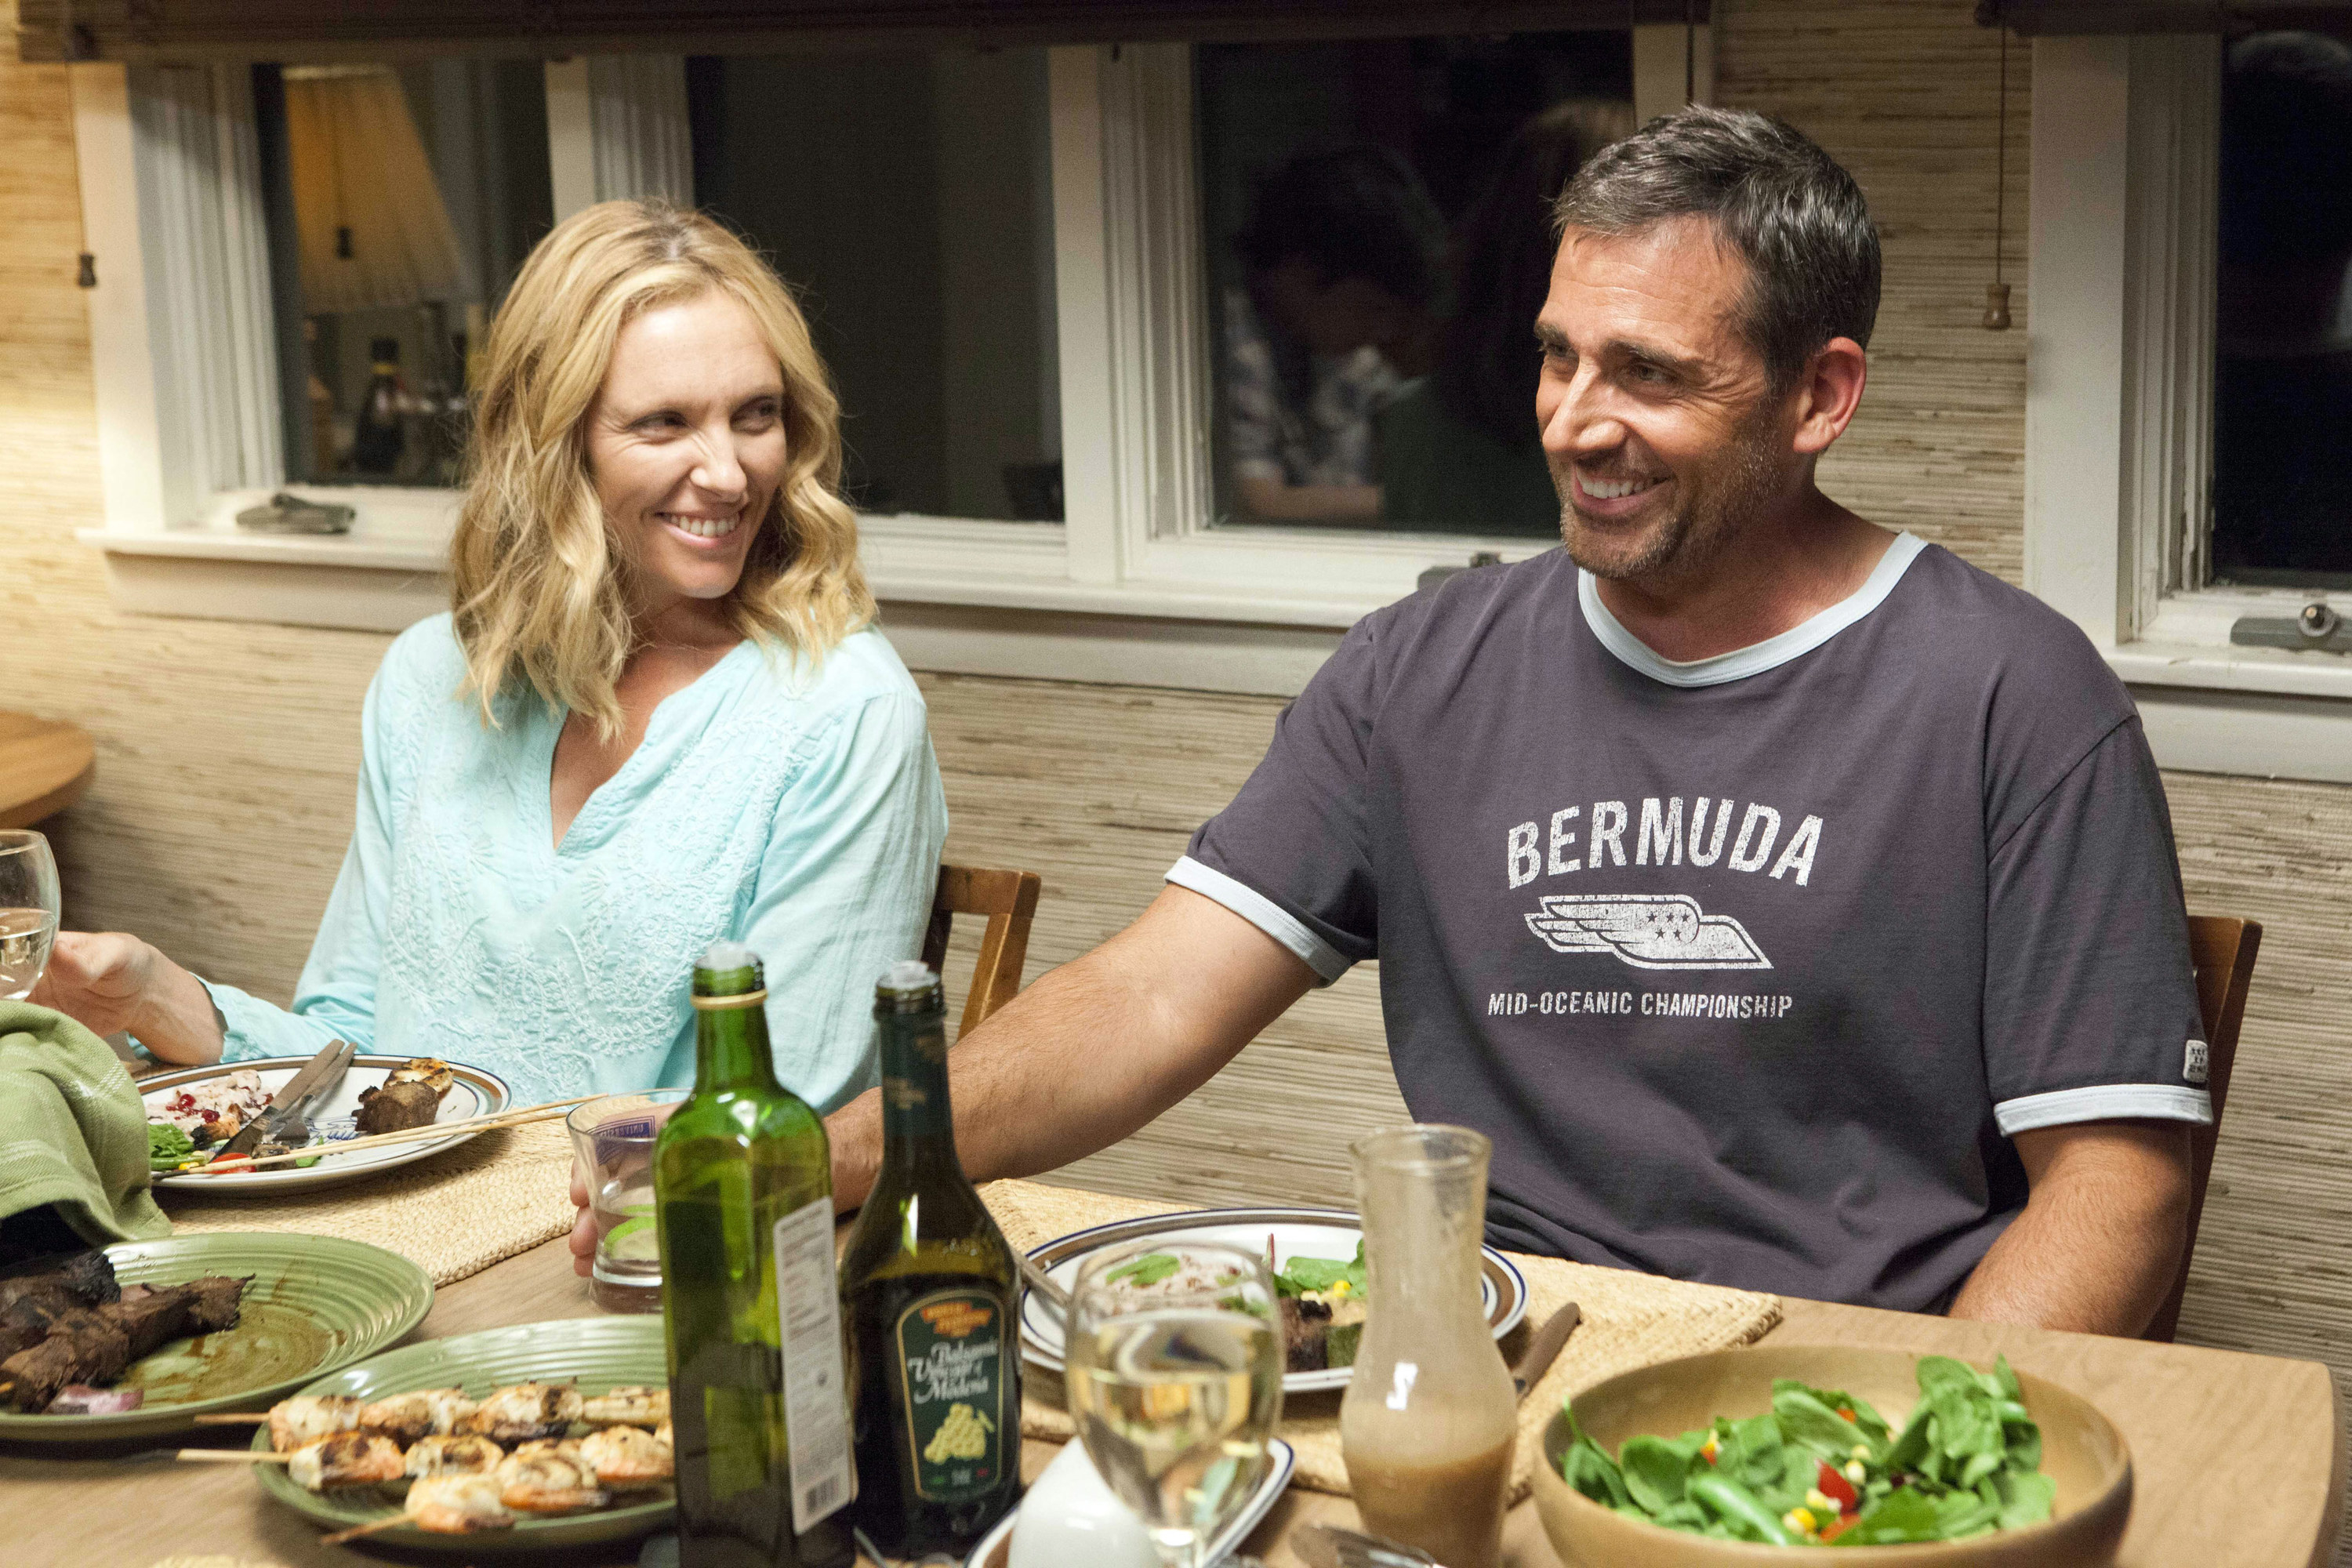 Toni Collette and Steve Carell smile at a dinner table